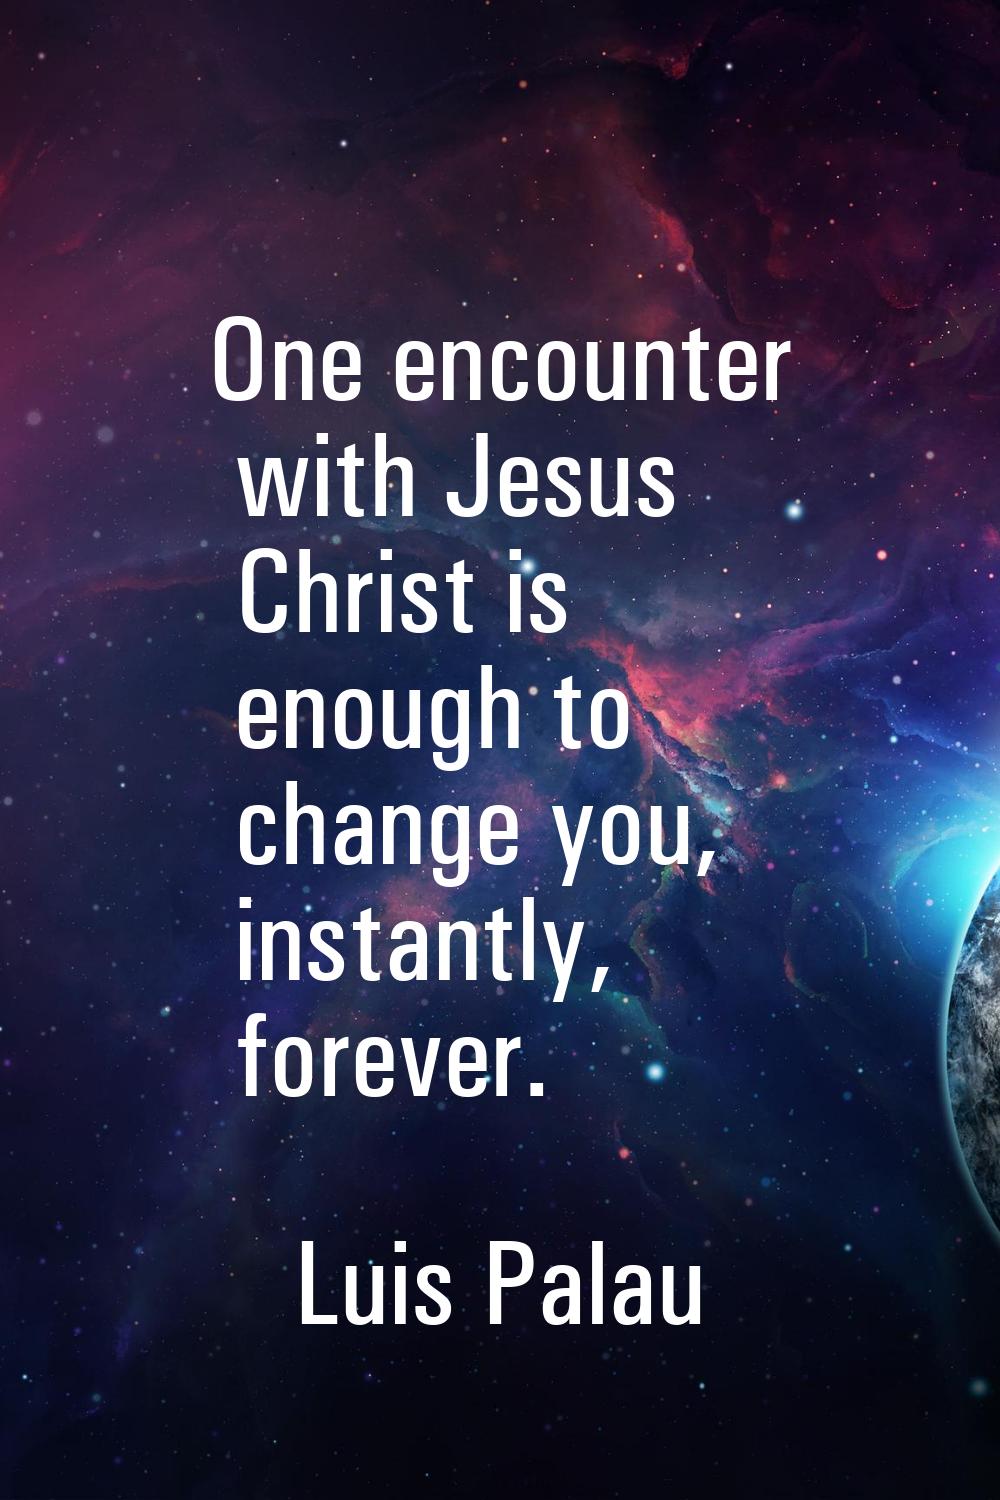 One encounter with Jesus Christ is enough to change you, instantly, forever.